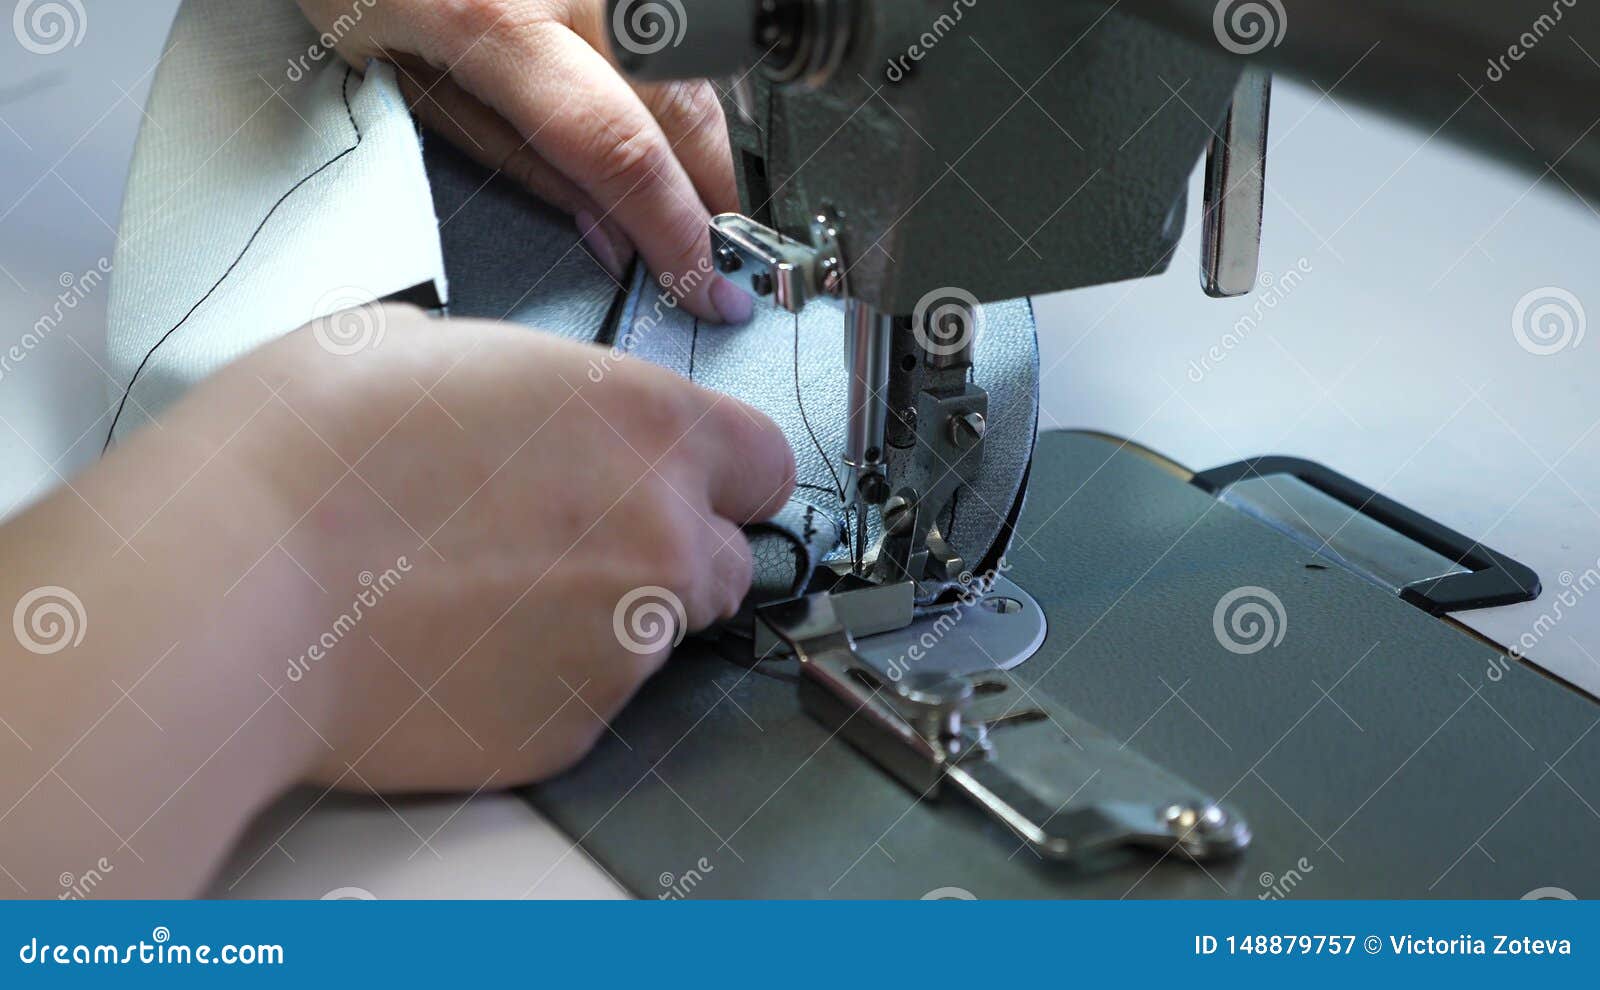 Process Of Sewing Leather Goods. The Needle Of The Sewing Machine In A Sewing Machine Needle Moves Up And Down